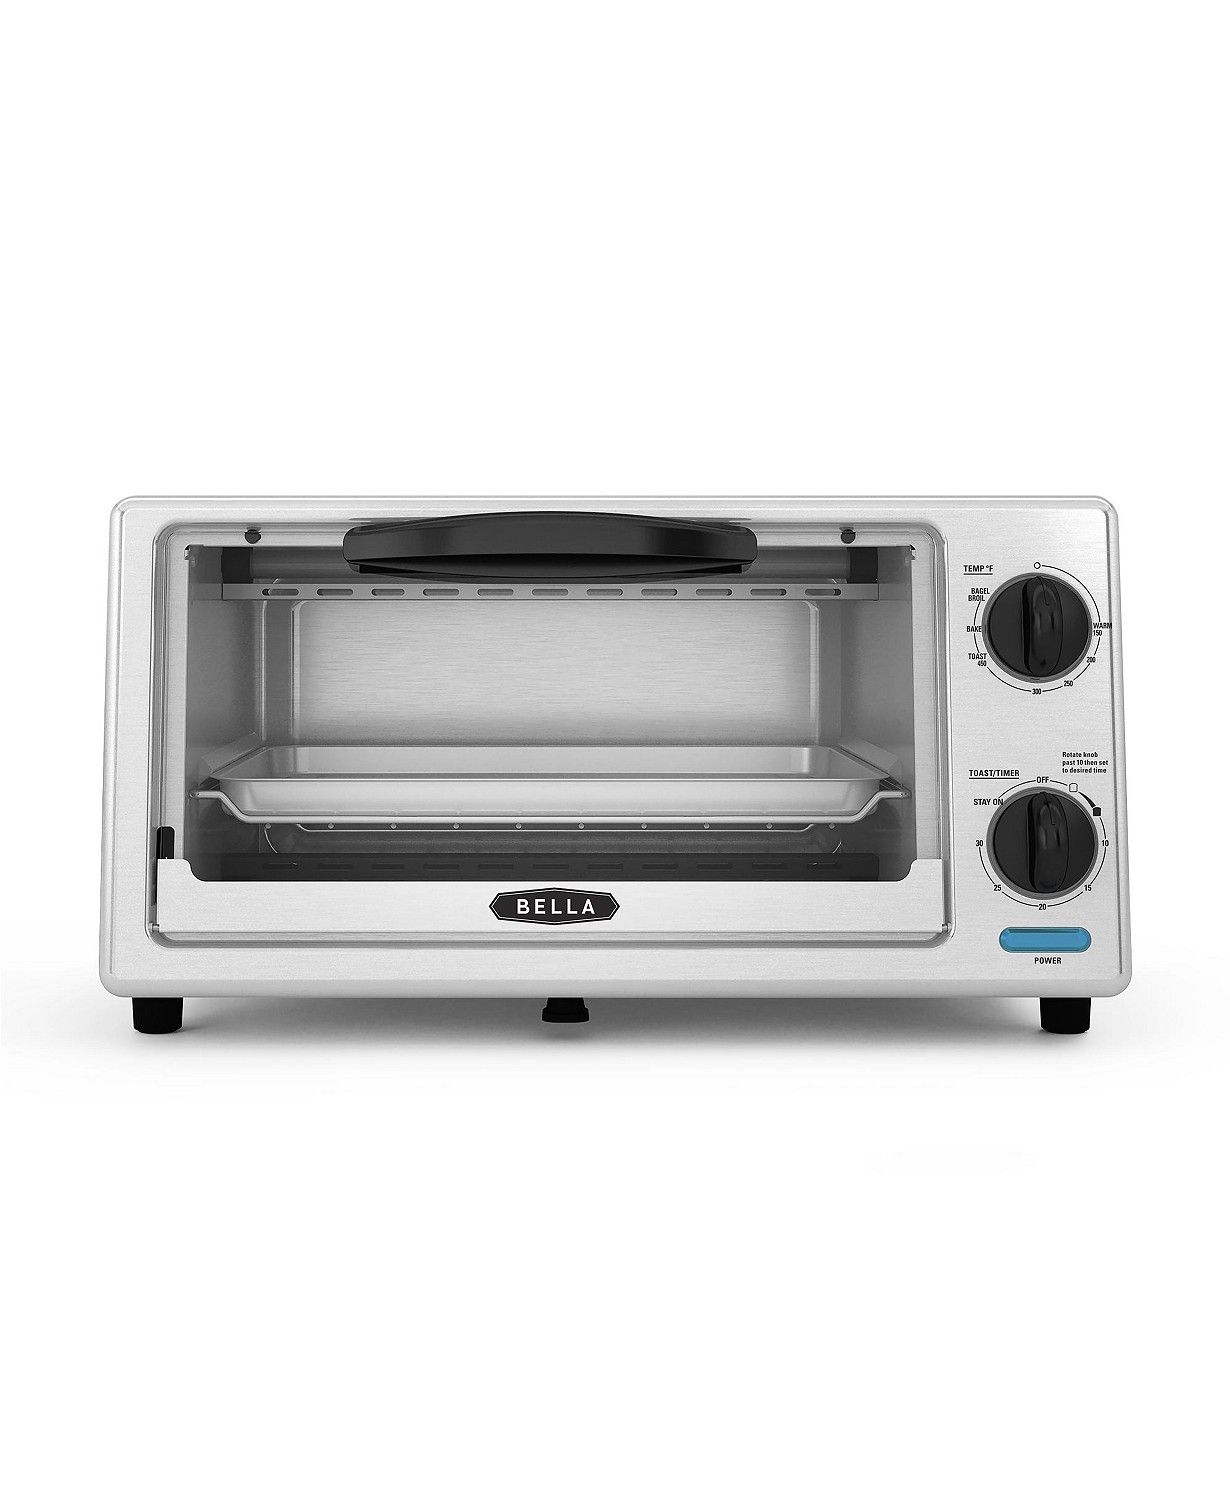 Bella 4-Slice Stainless Steel Toaster Oven -$19.99(56% Off)